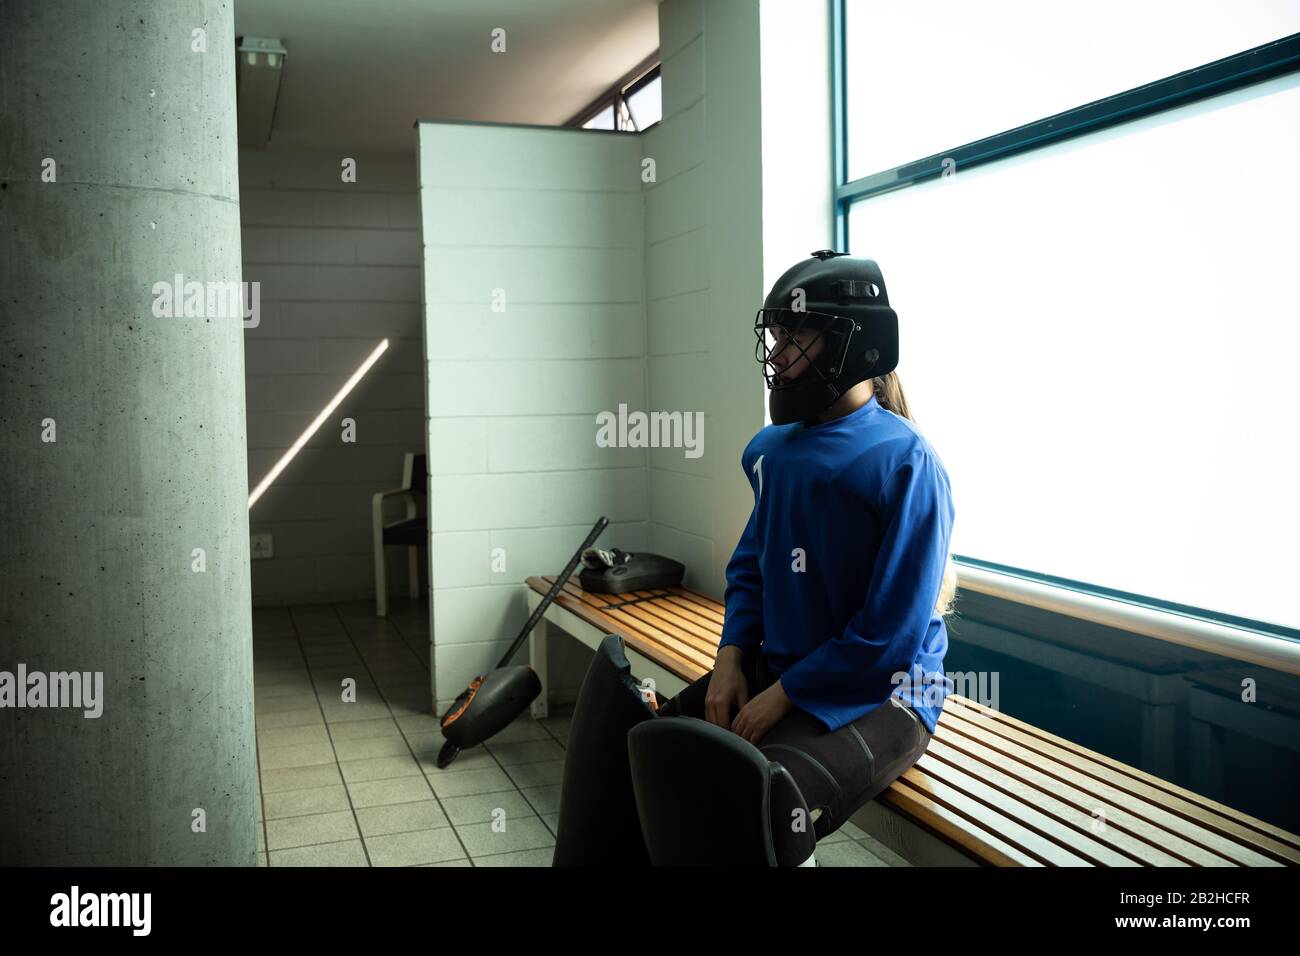 Female hockey player in a cloakroom Stock Photo